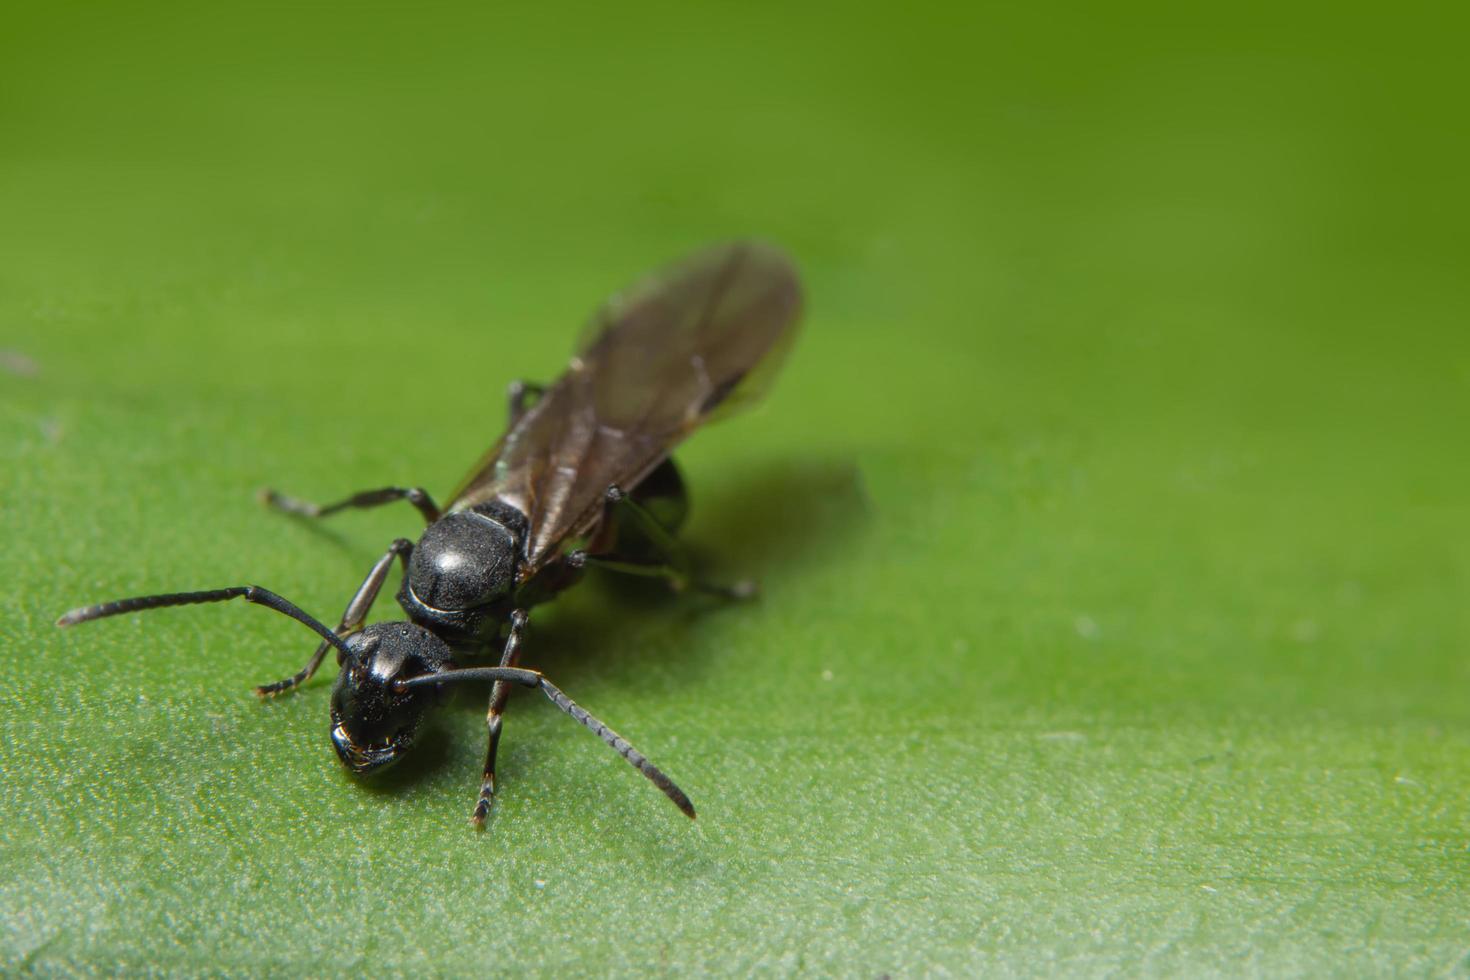 Ant with wings, close-up photo